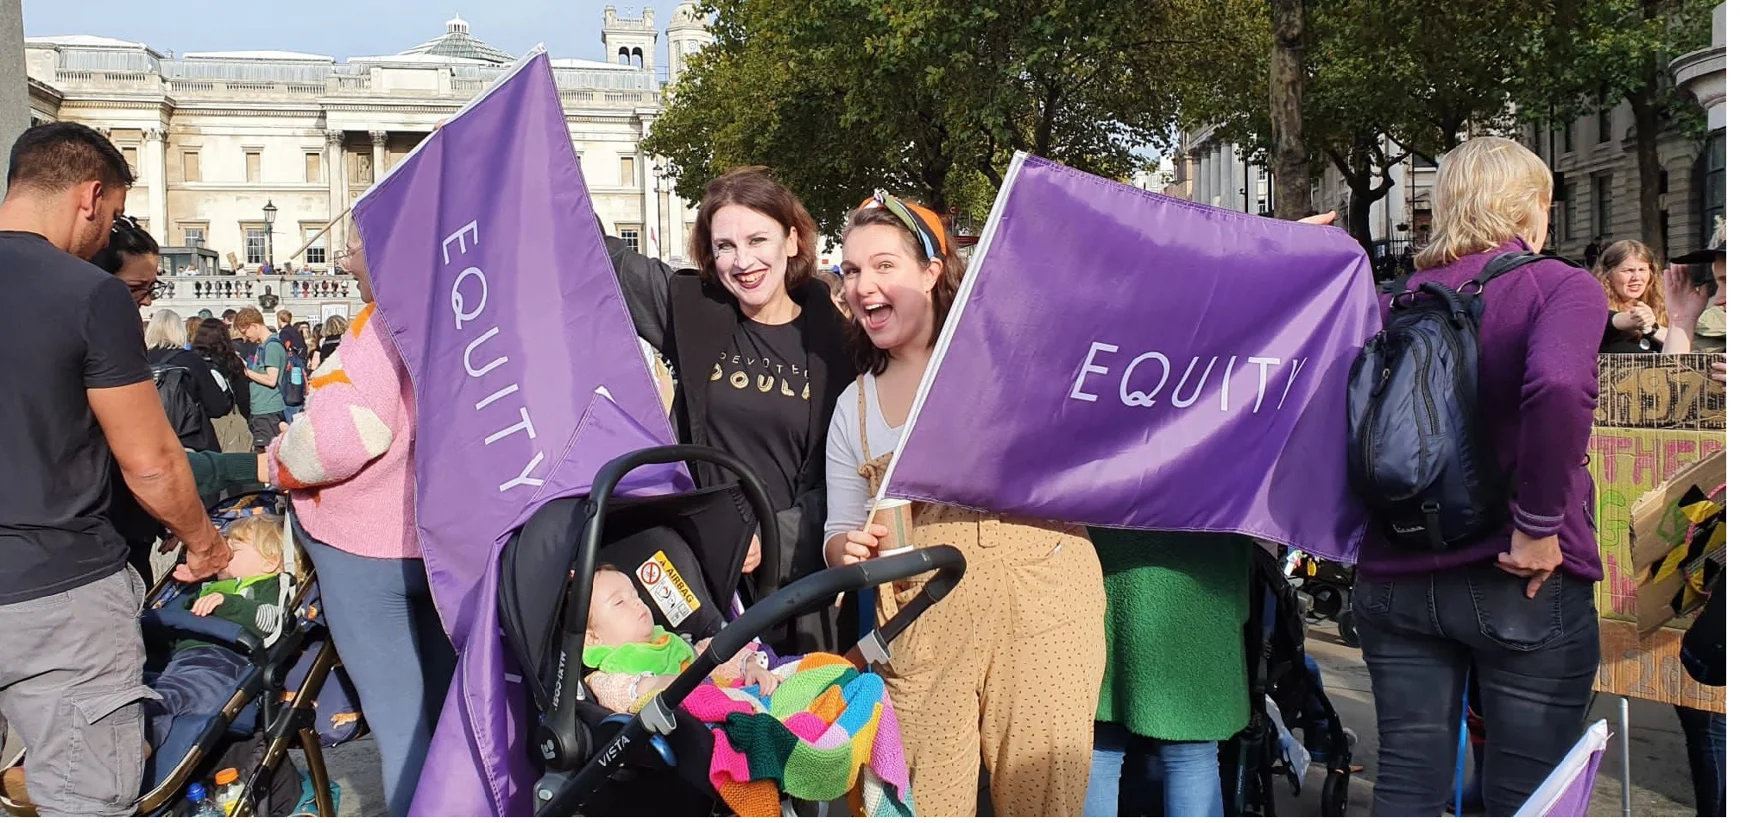 Members of Equity's Women's Committee holding flags at demo with baby